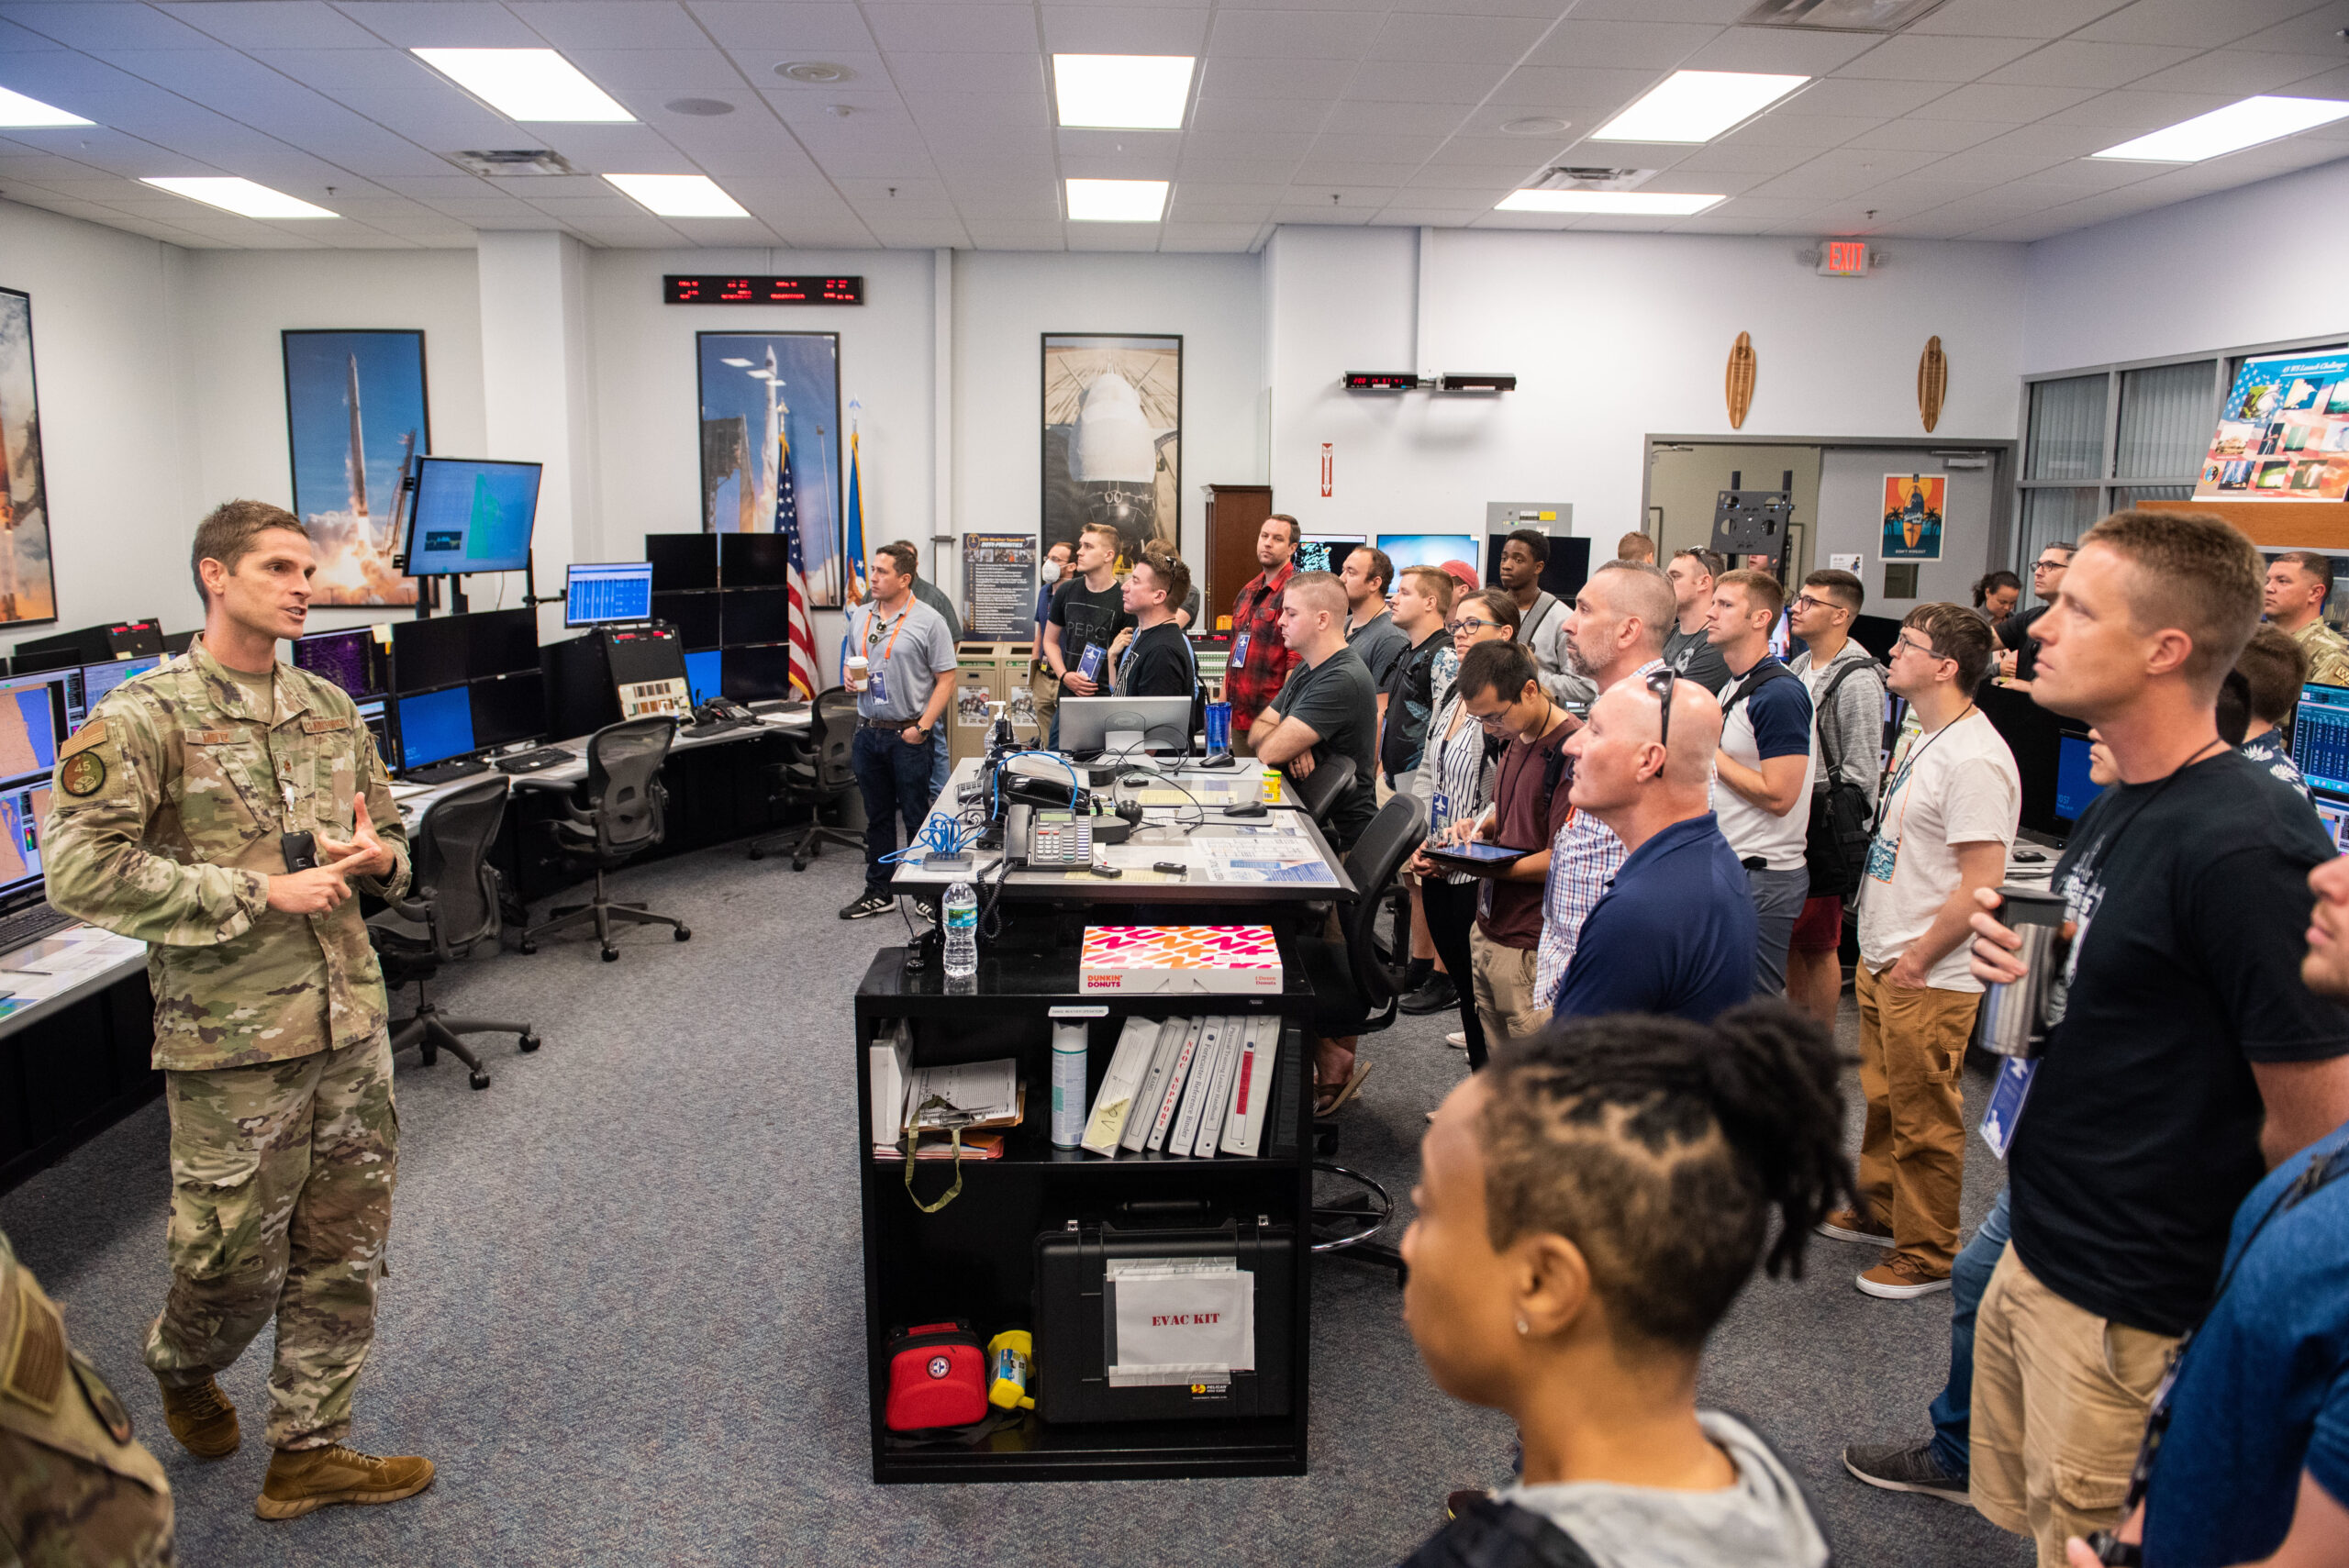 U.S. Air Force Maj. Nathan Motz, 45th Weather Squadron, delivers a mission briefing to participants of the BRAVO Hackathon during a tour the Morrell Operations Center July 19, 2022, at Cape Canaveral Space Force Station, Fla. The event brought engineers, scientists, and coders together from four countries to solve problems with the launch mission. (U.S. Space Force photo by Amanda Inman)